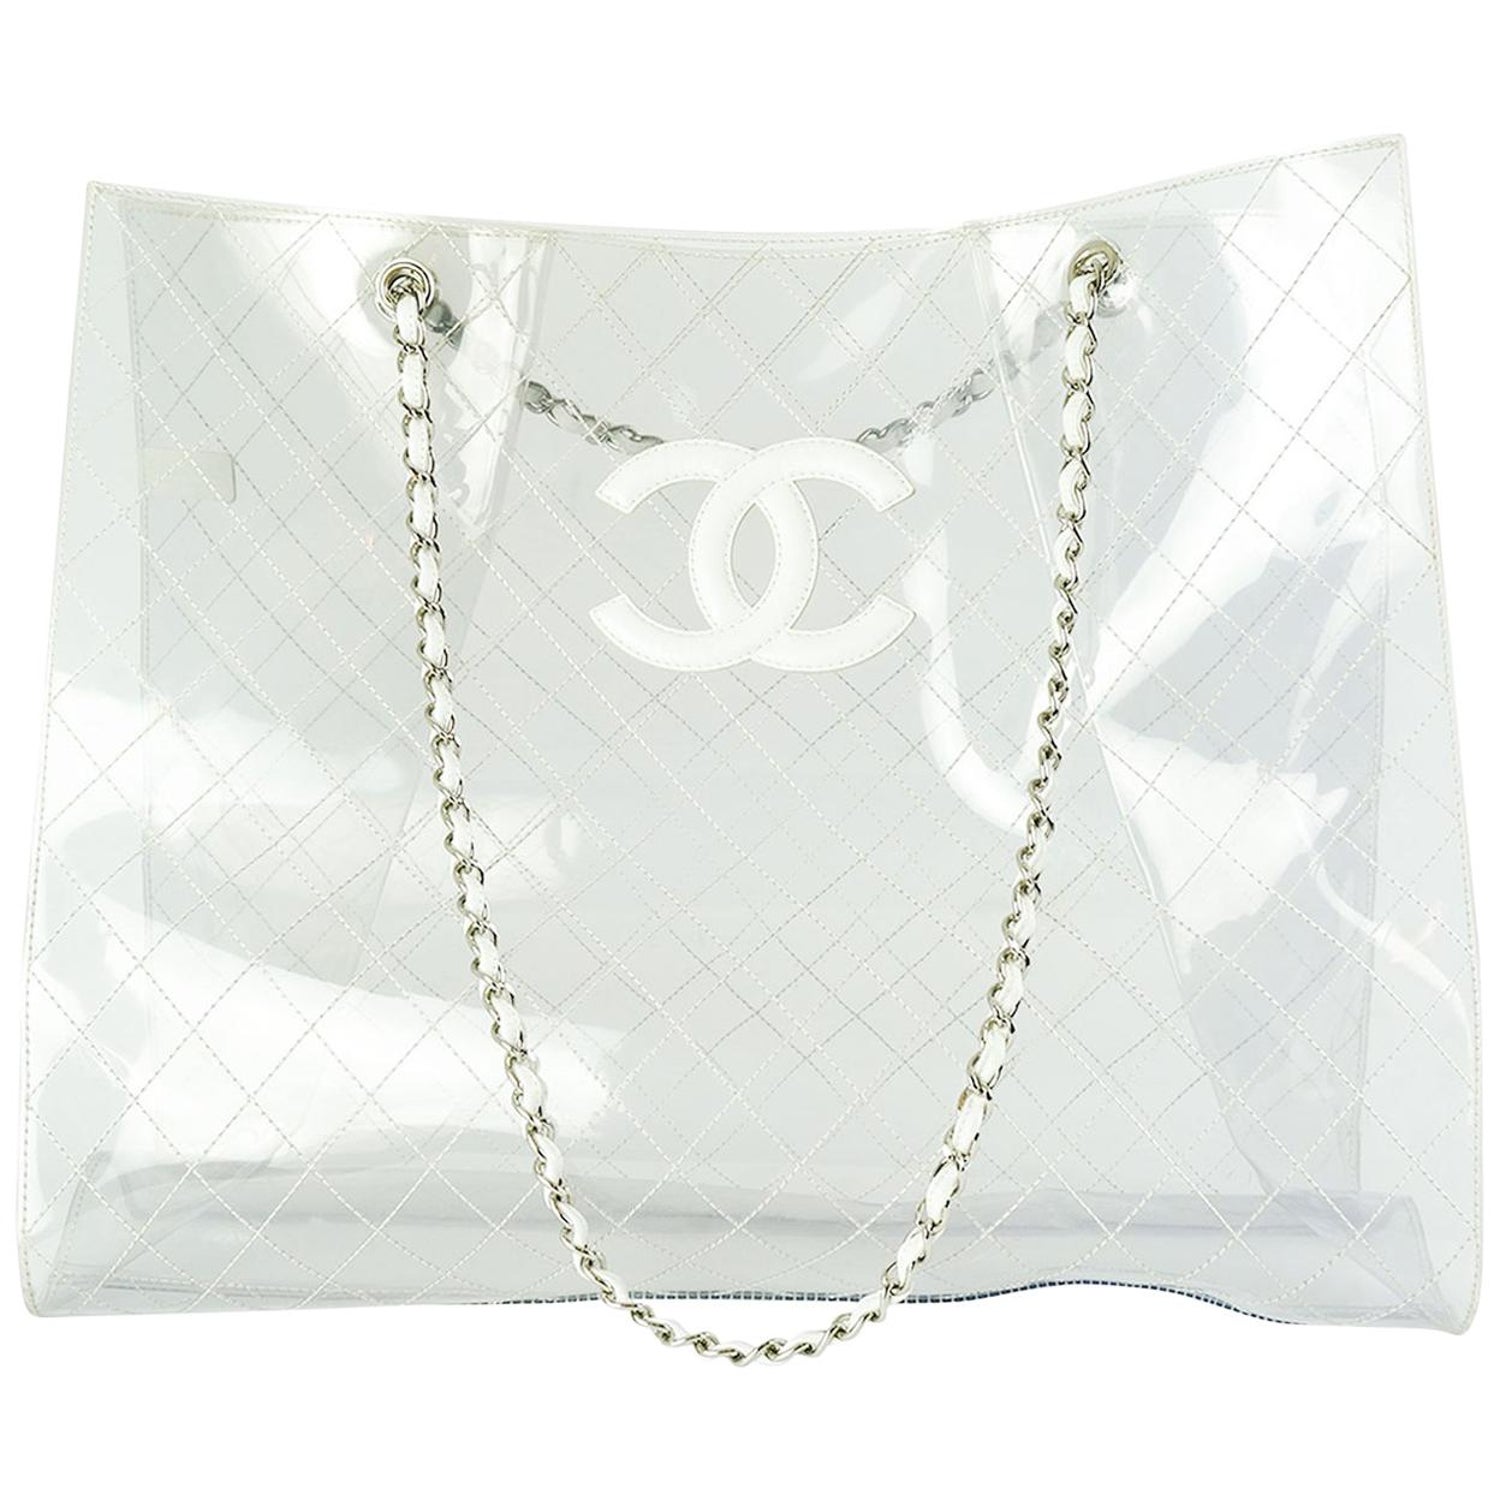 Chanel Limited Edition Vintage Duffel Tote White and Black Leather